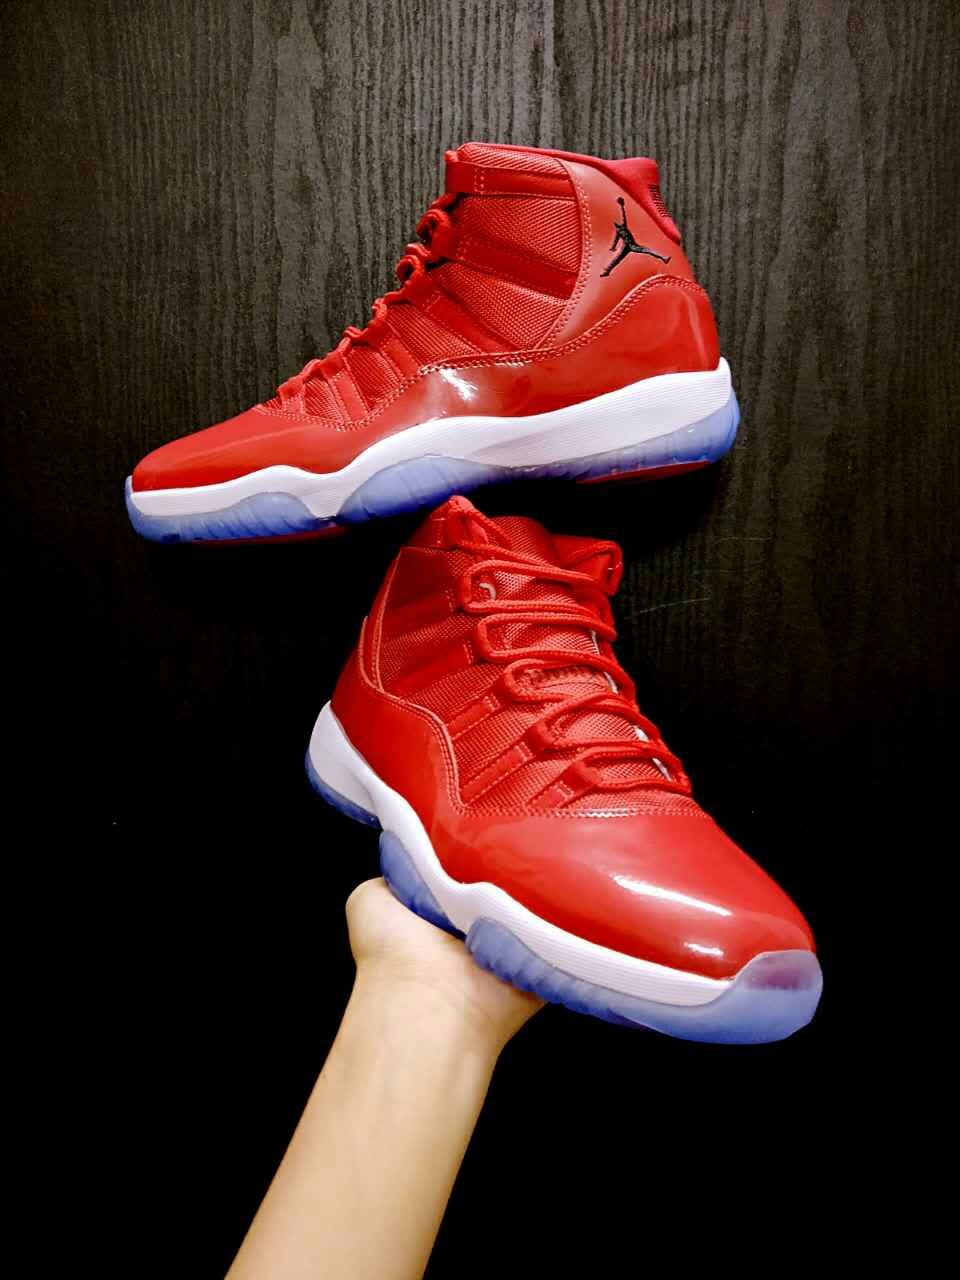 New Air Jordan 11 All Red Ice Sole Lover Shoes